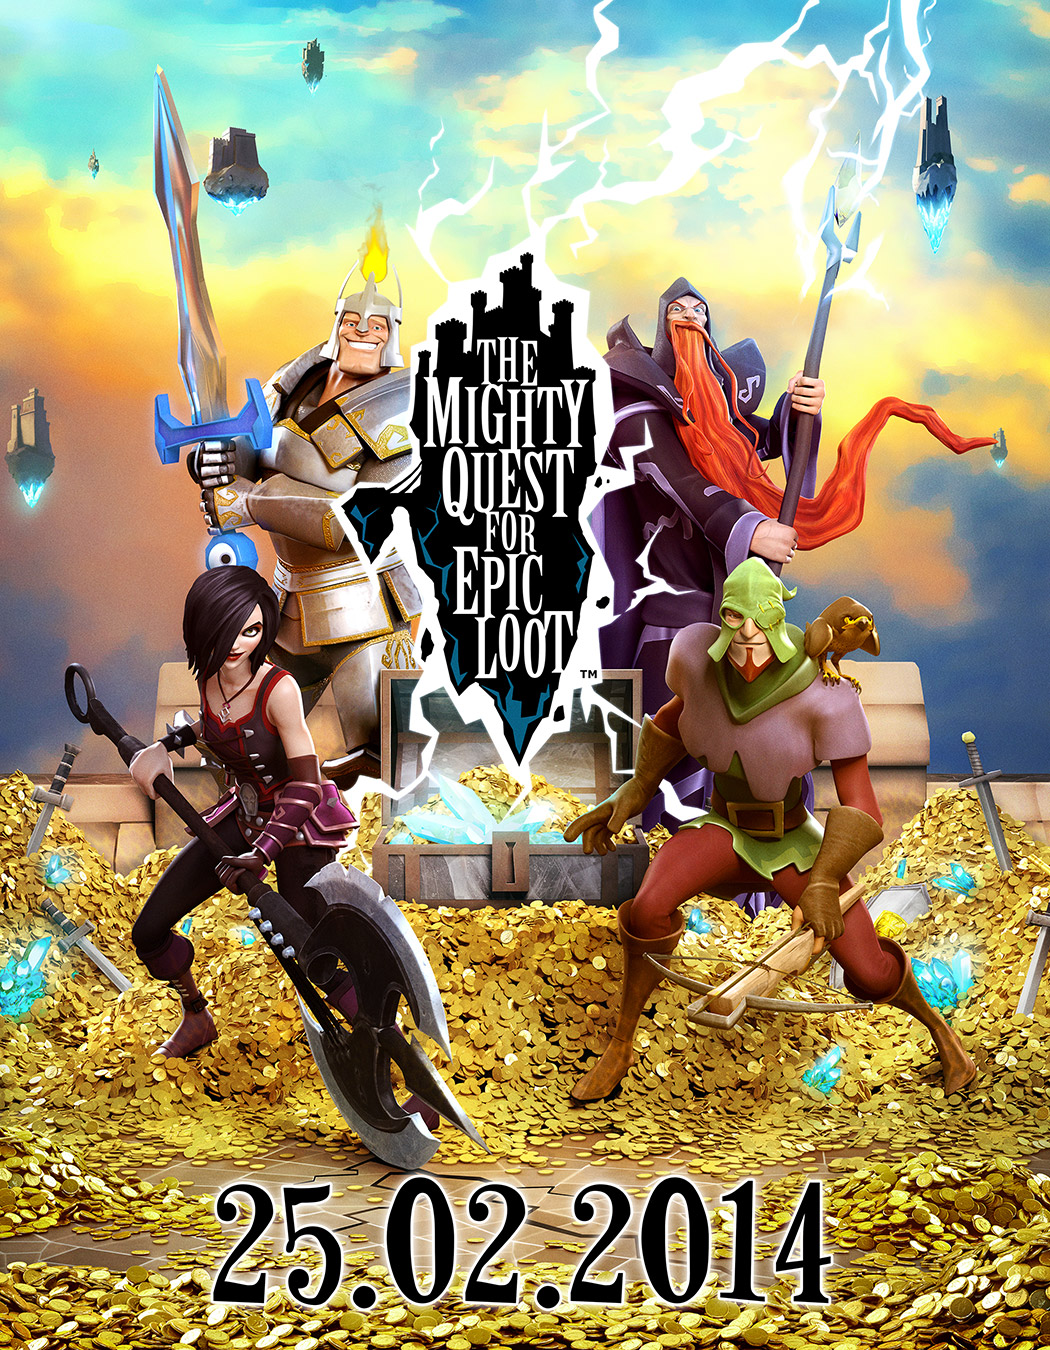 The Mighty Quest for Epic Loot Open Beta beginnt am 25. Februar